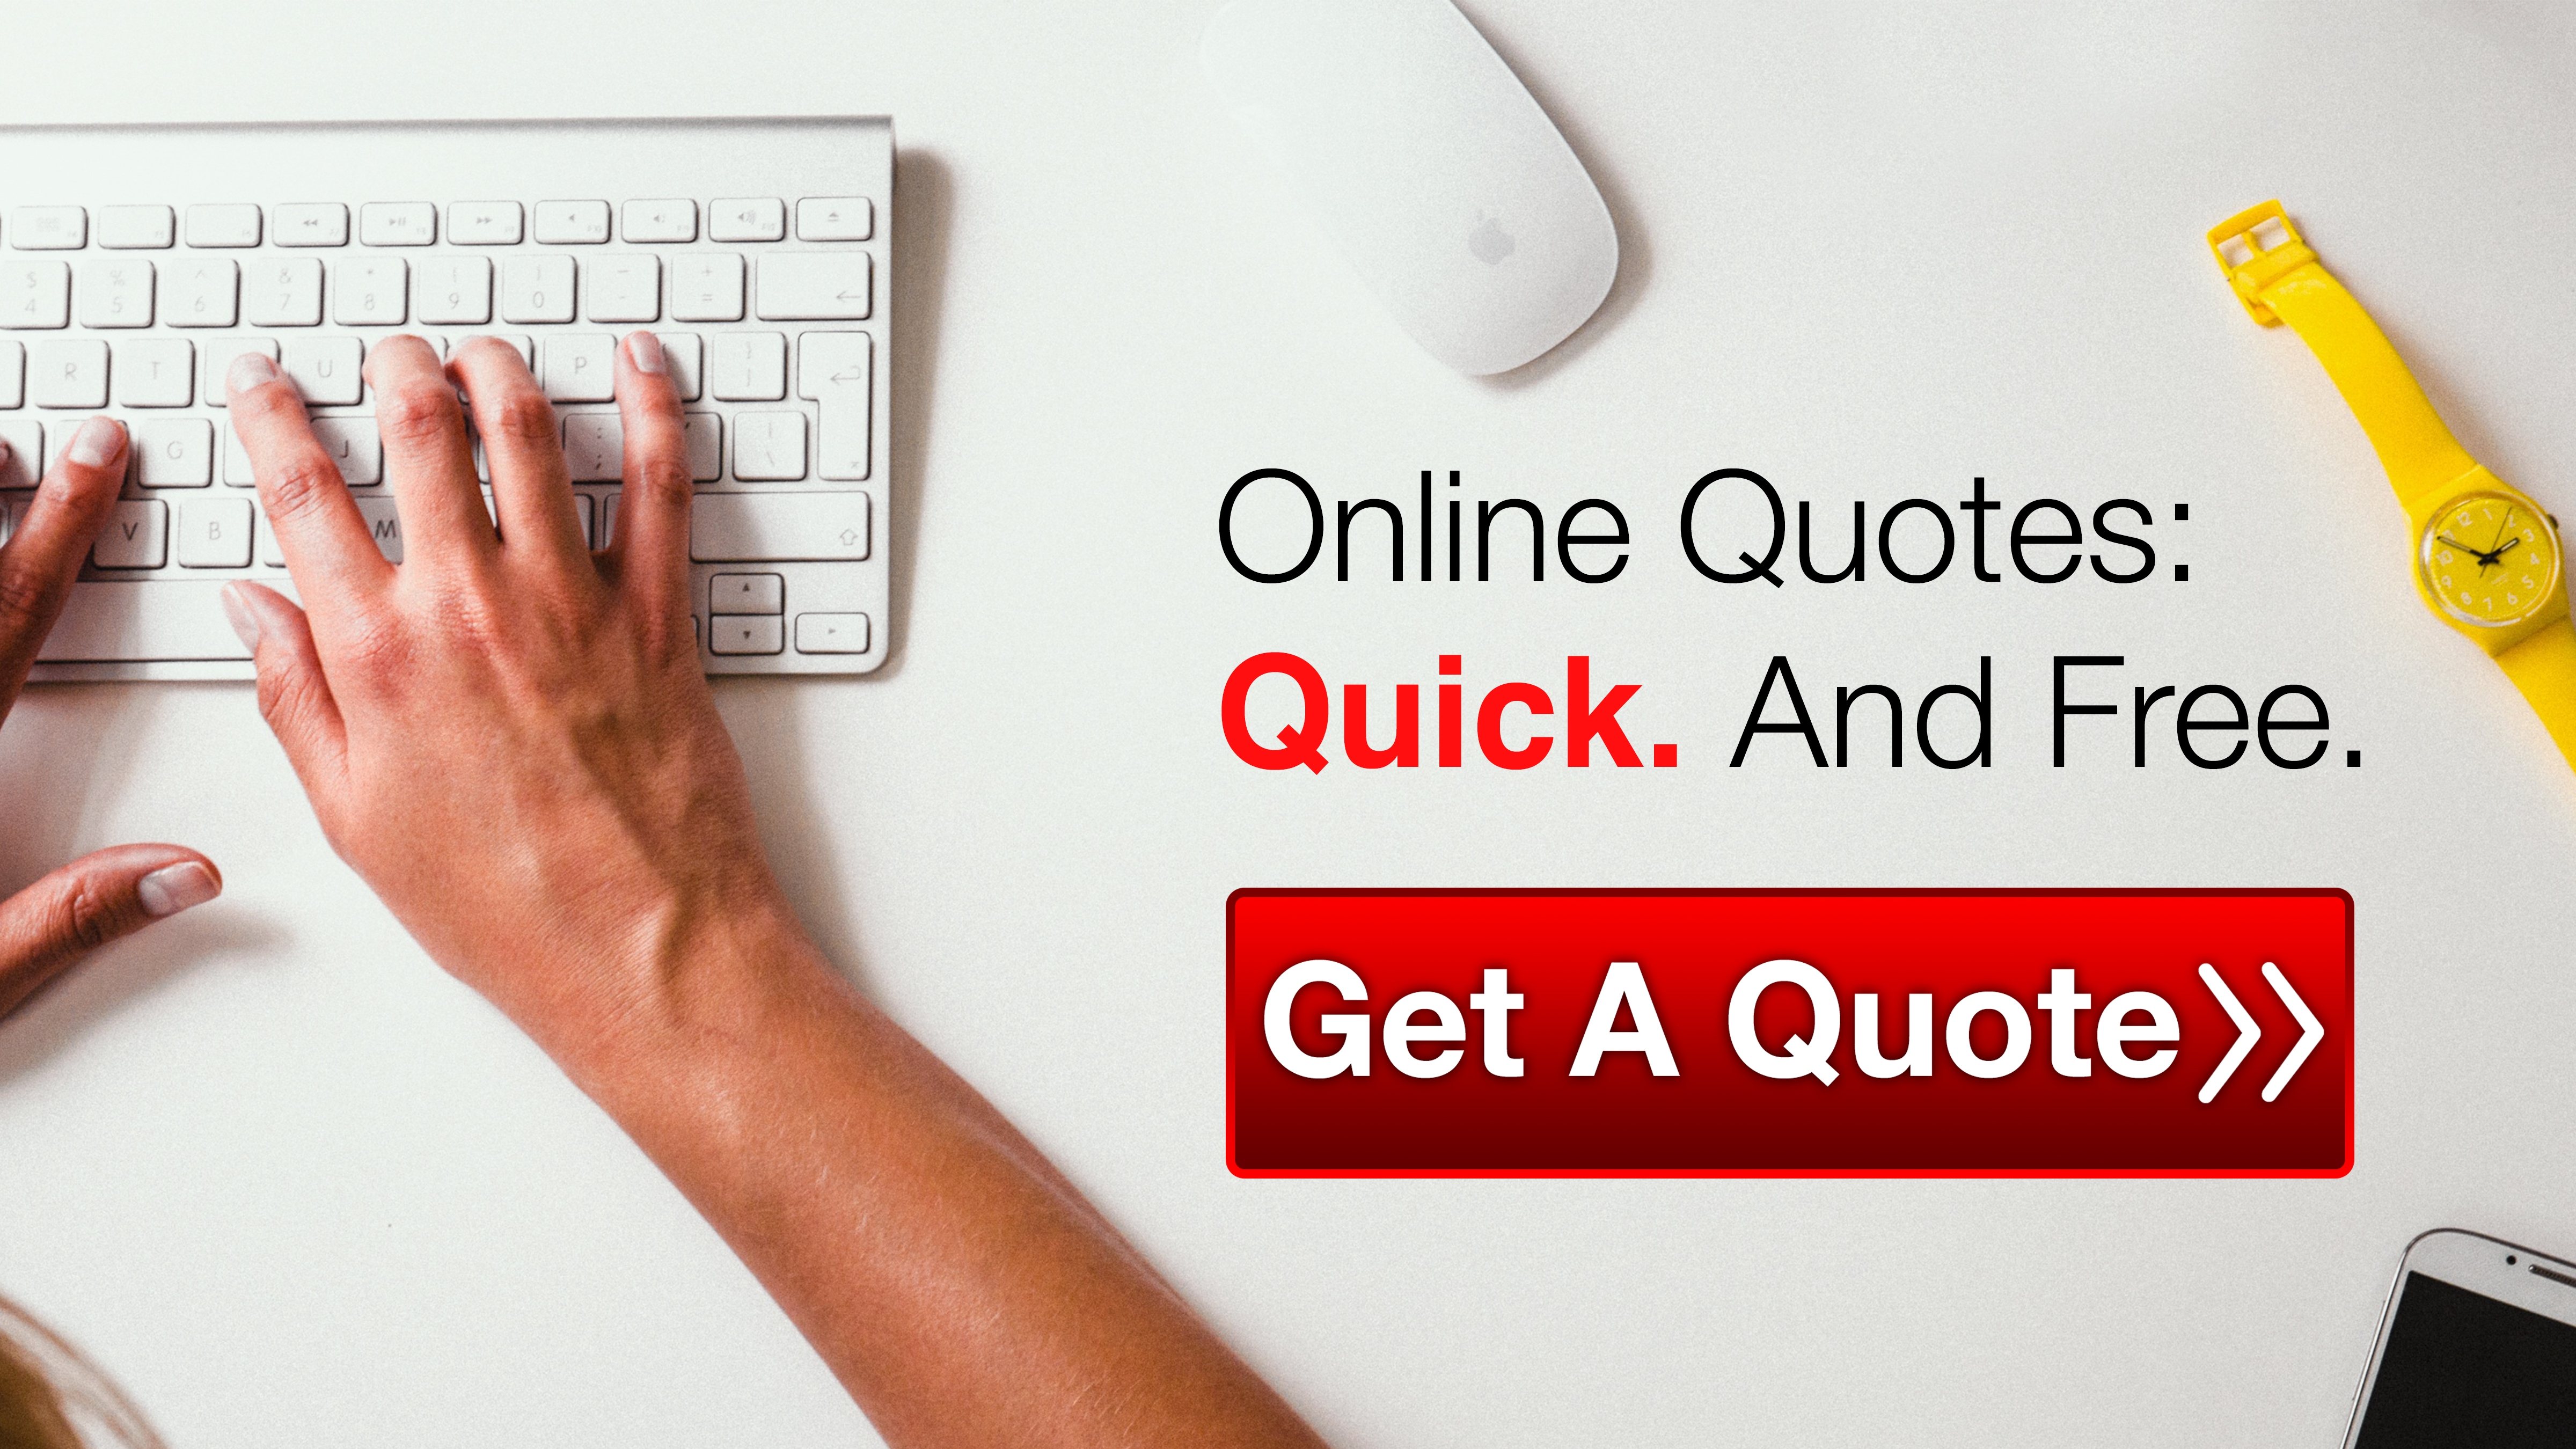 Get A Quote Slidedeck Image